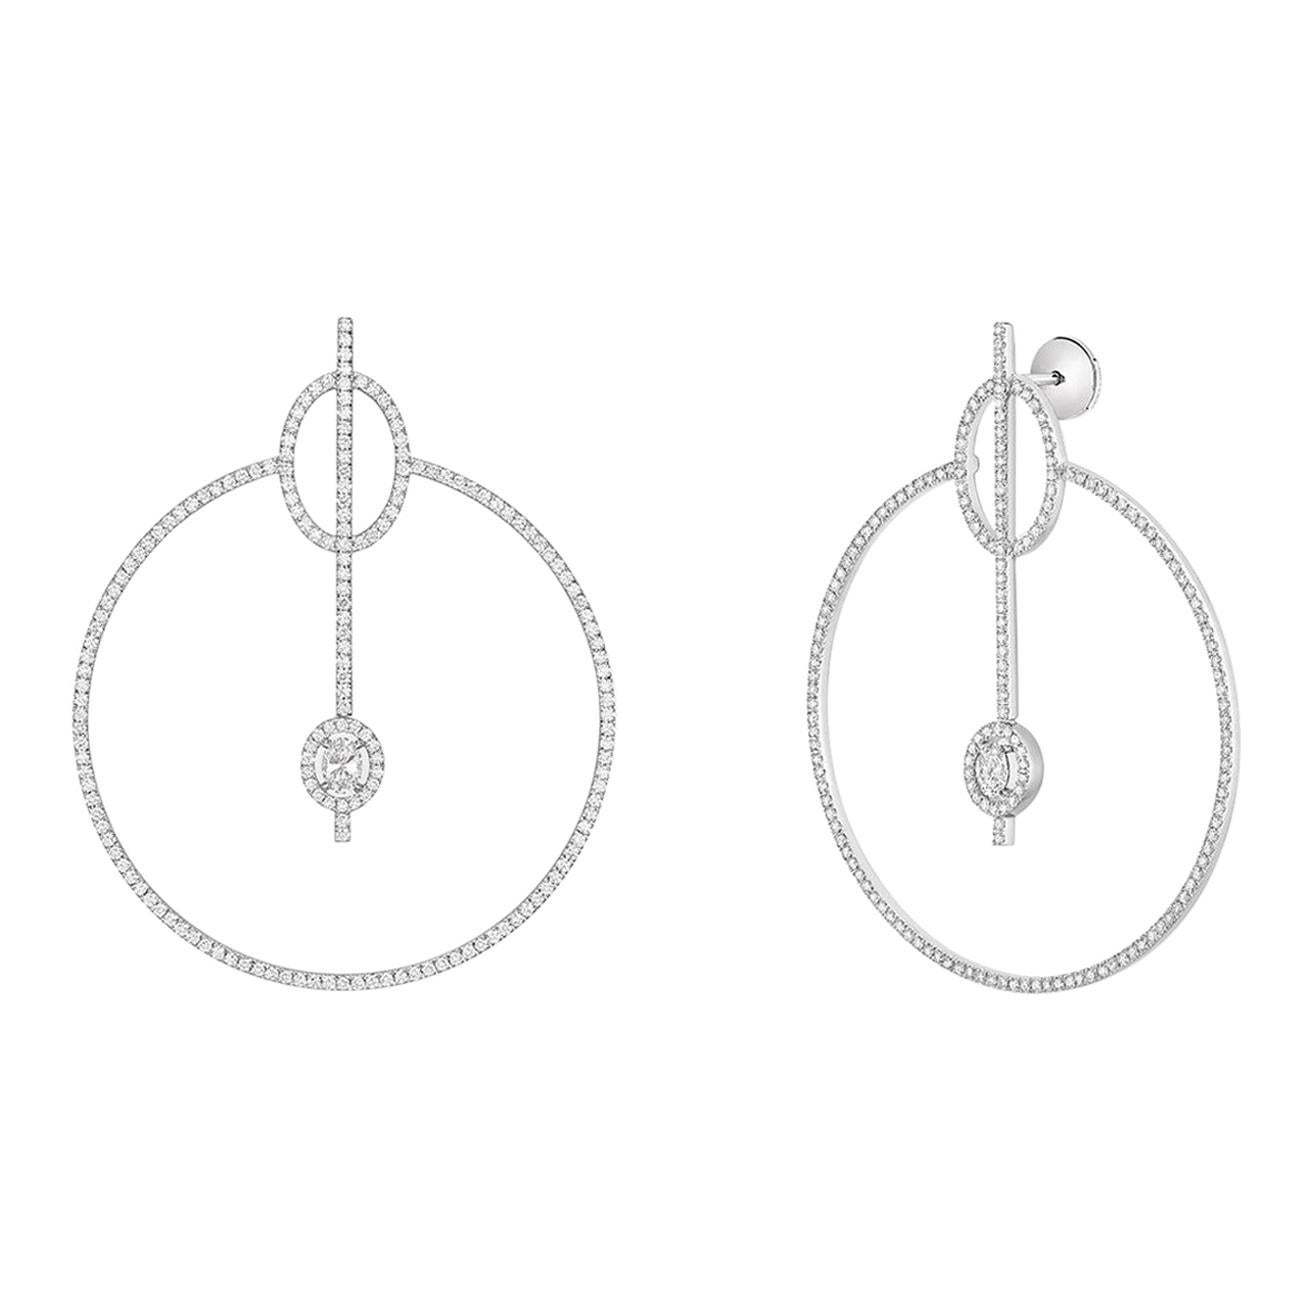 Messika Glam'Azone 18k White Gold Pave Diamond Earrings 2.52cttw For Sale